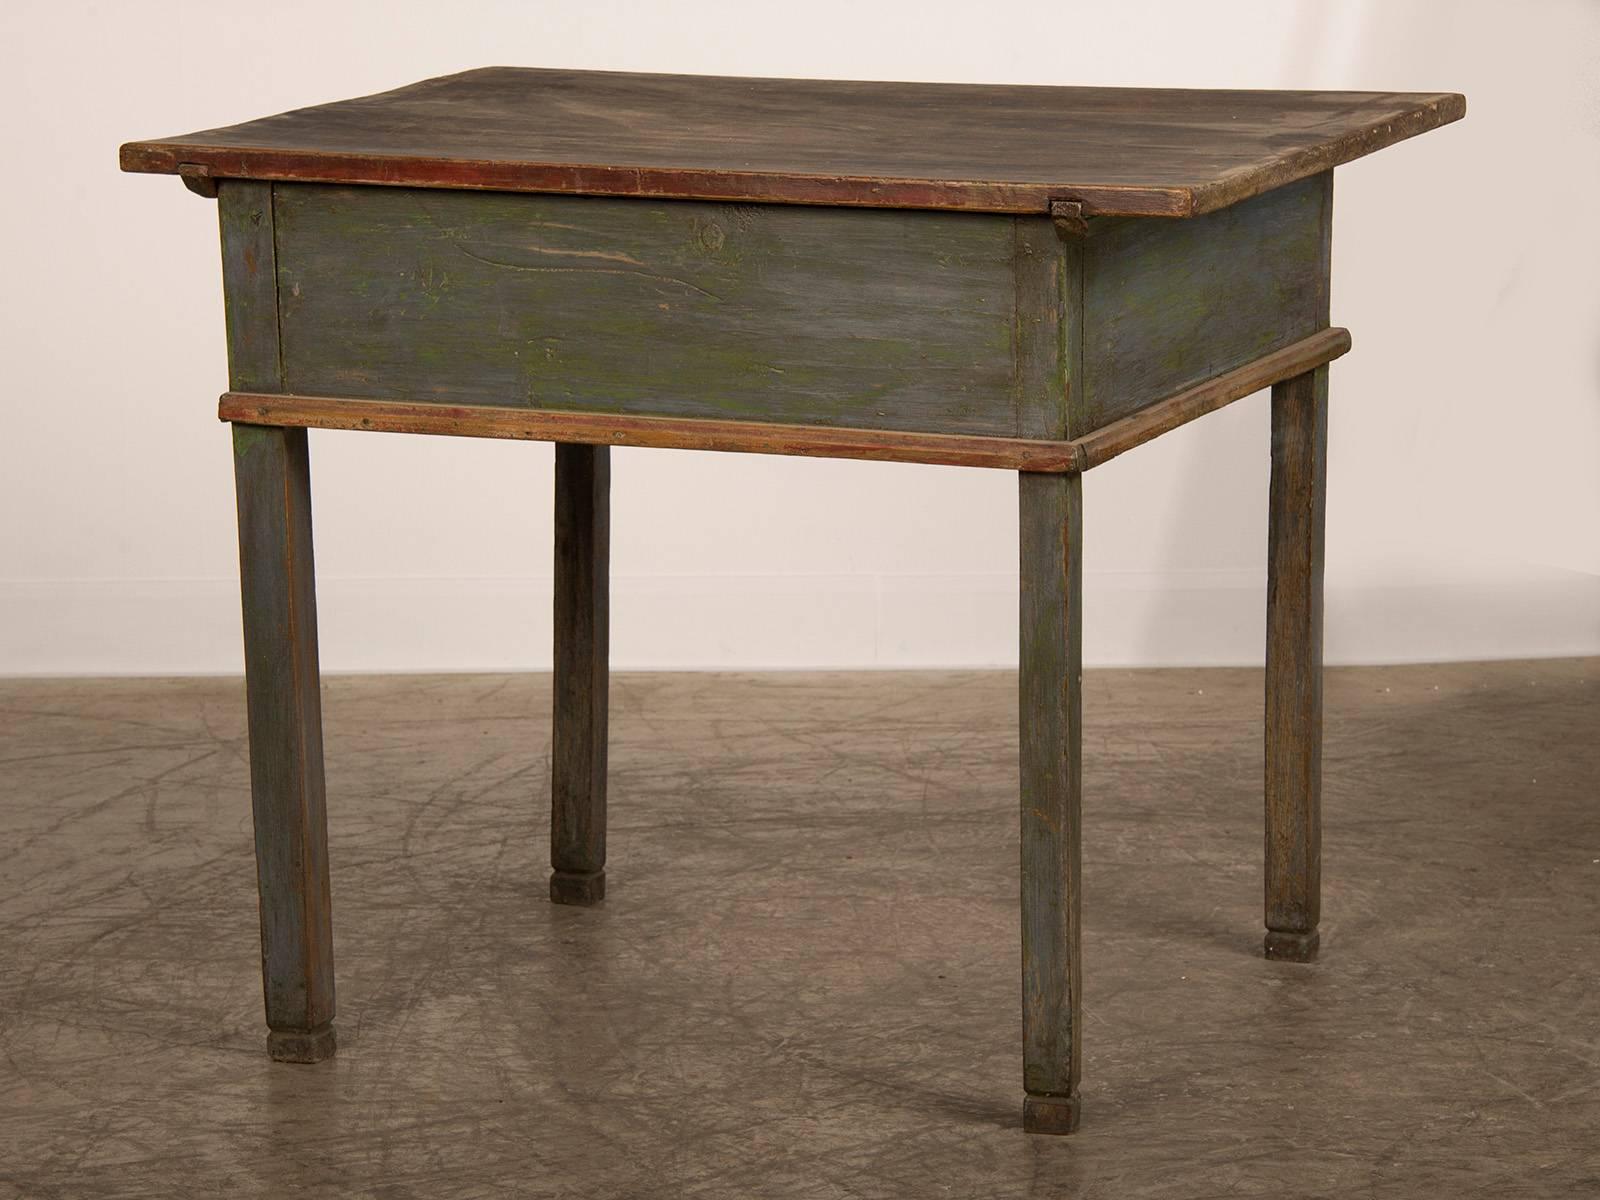 Antique Rustic German Painted Workbench or Writing Table, circa 1790 For Sale 1